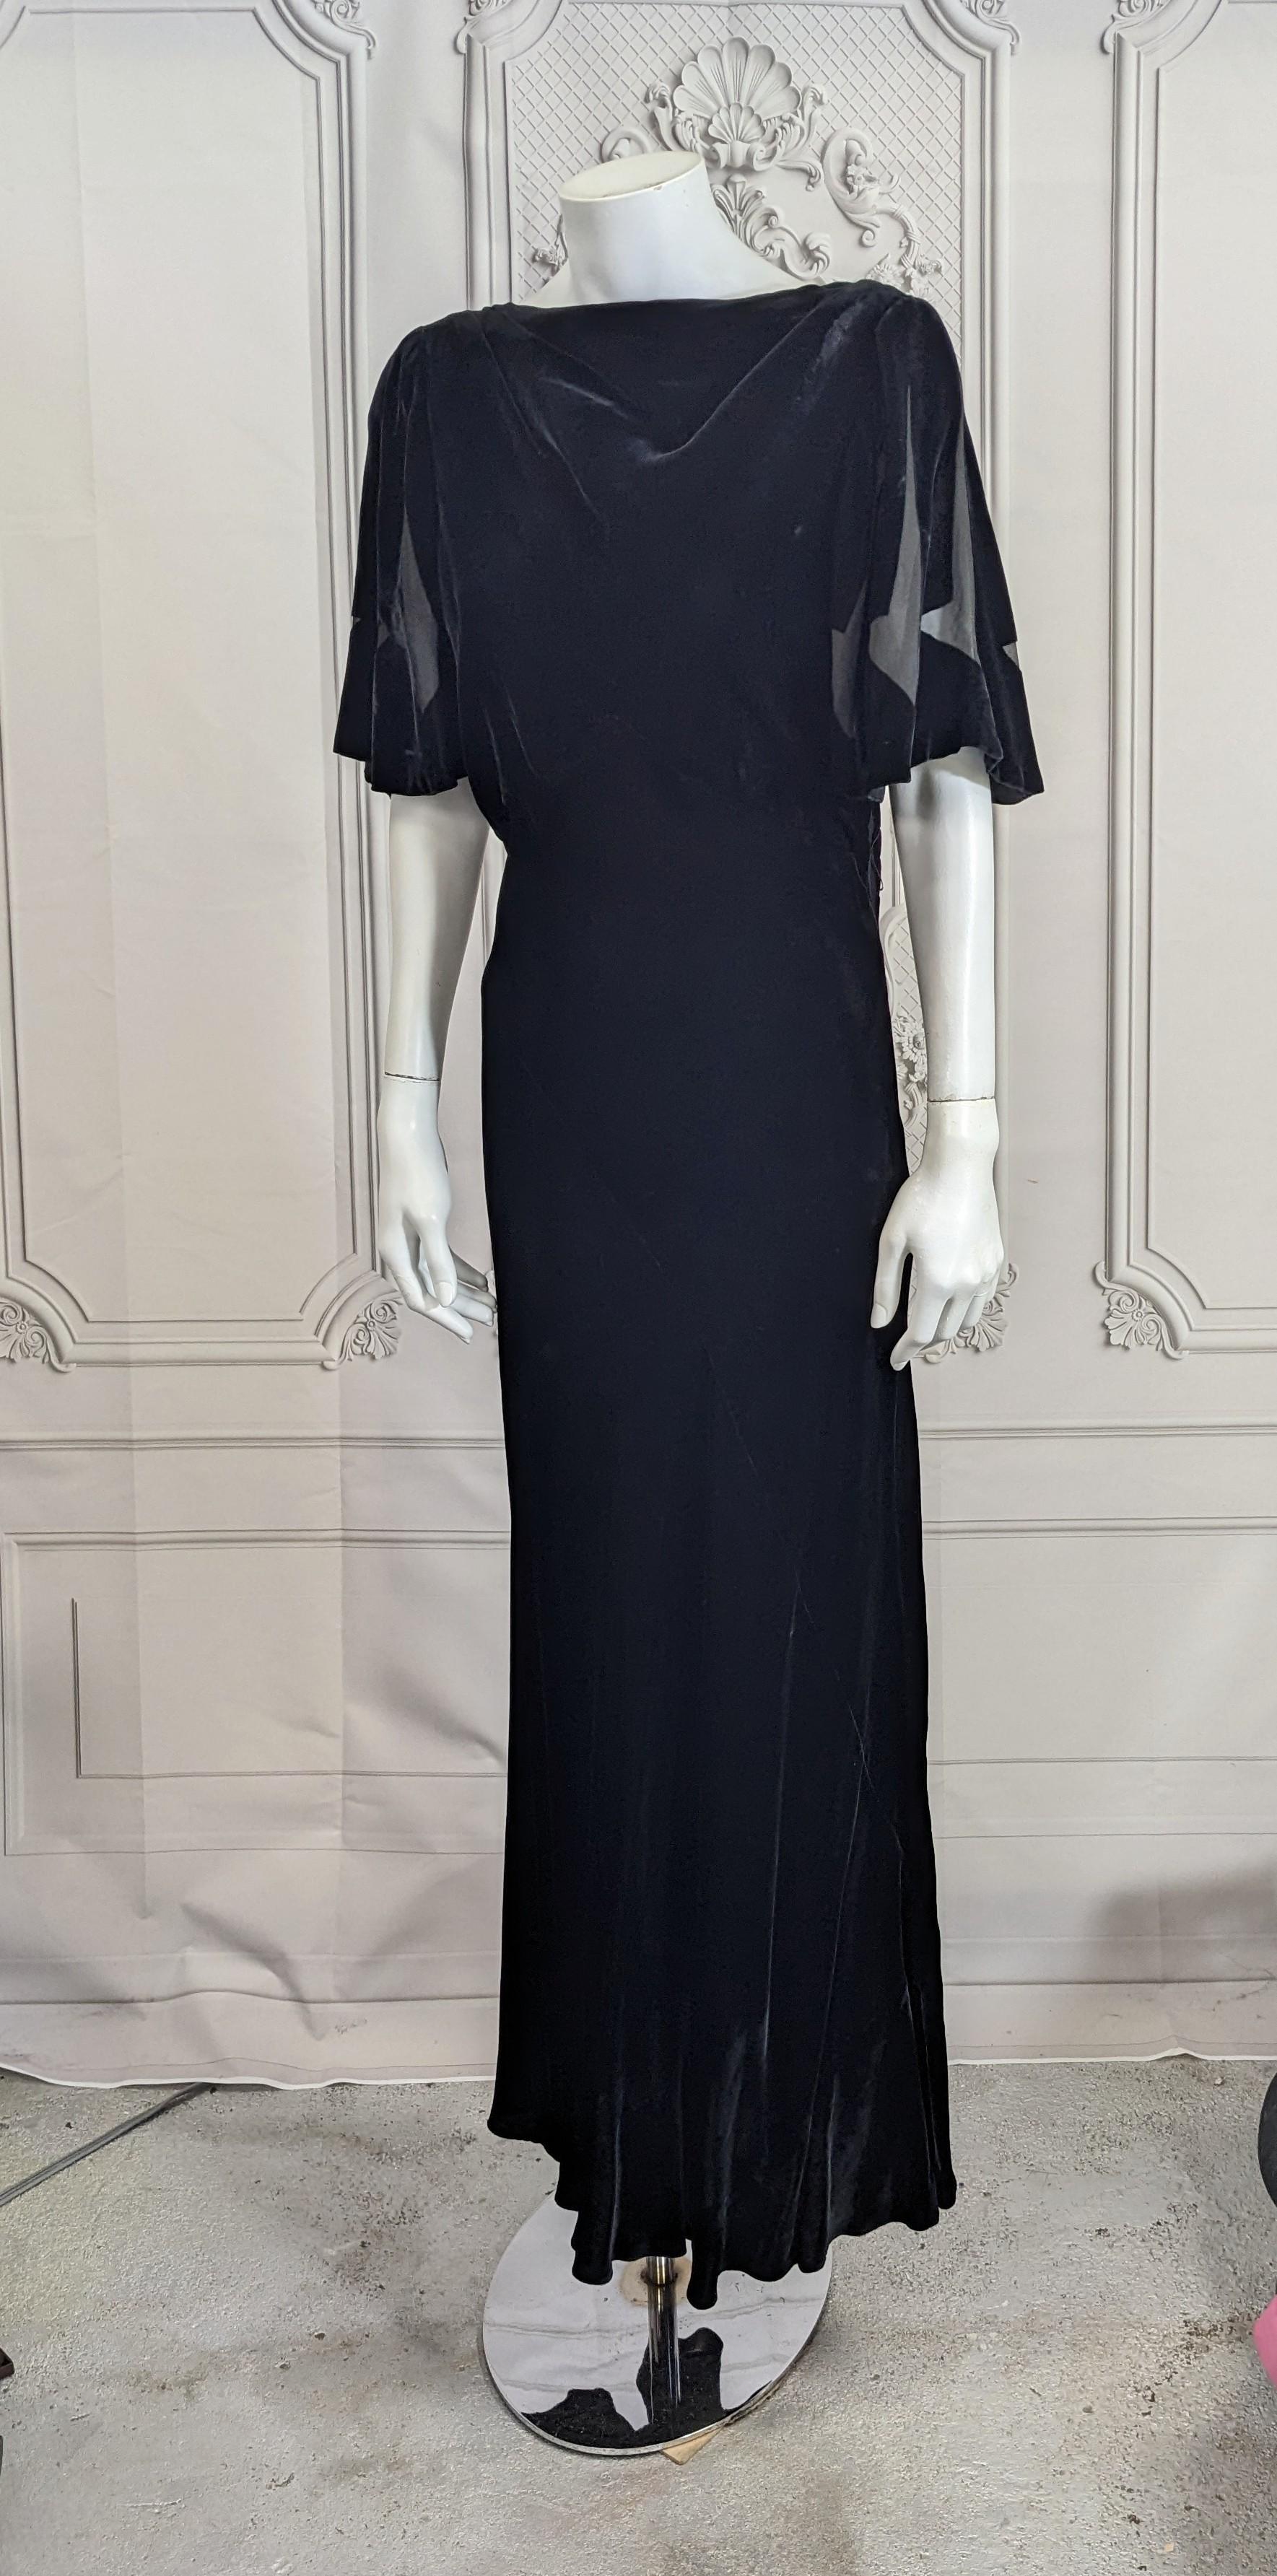 Lovely Art Deco Burn Out Velvet Gown from the 1930's. Typical bias slim cut velvet with flutter sleeves with incredible sheer Art Deco arrow designs radiating out. 
Side snap opening. Slim cut small size 2-4. circa 1930's USA. 